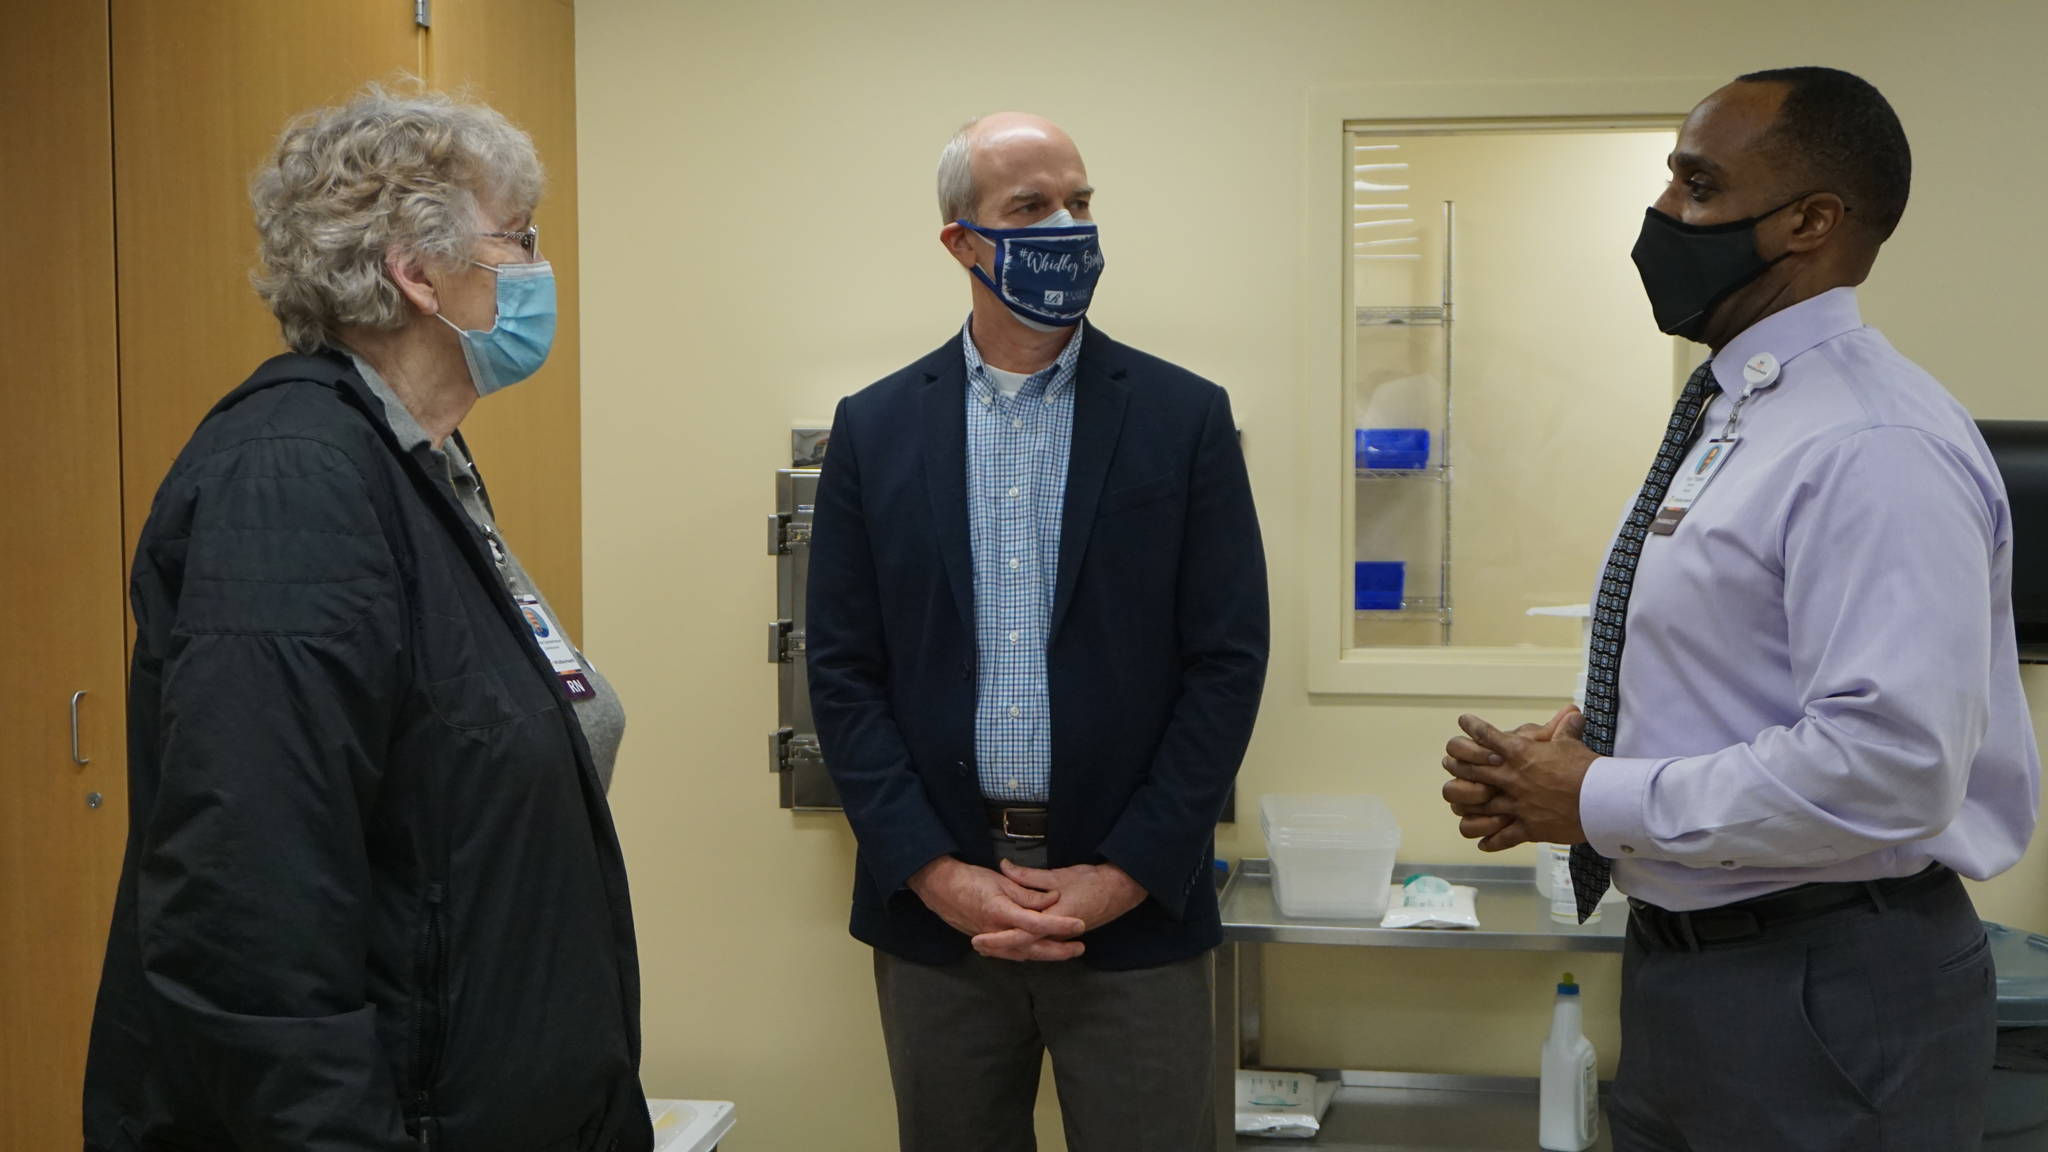 Photo by WhidbeyHealth
U.S. Rep. Rick Larsen, with WhidbeyHealth Commissioner Grethe Cammermeyer and pharmacy director Dr. Tony Triplett discuss vaccine processes during Larsen’s visit last Friday.